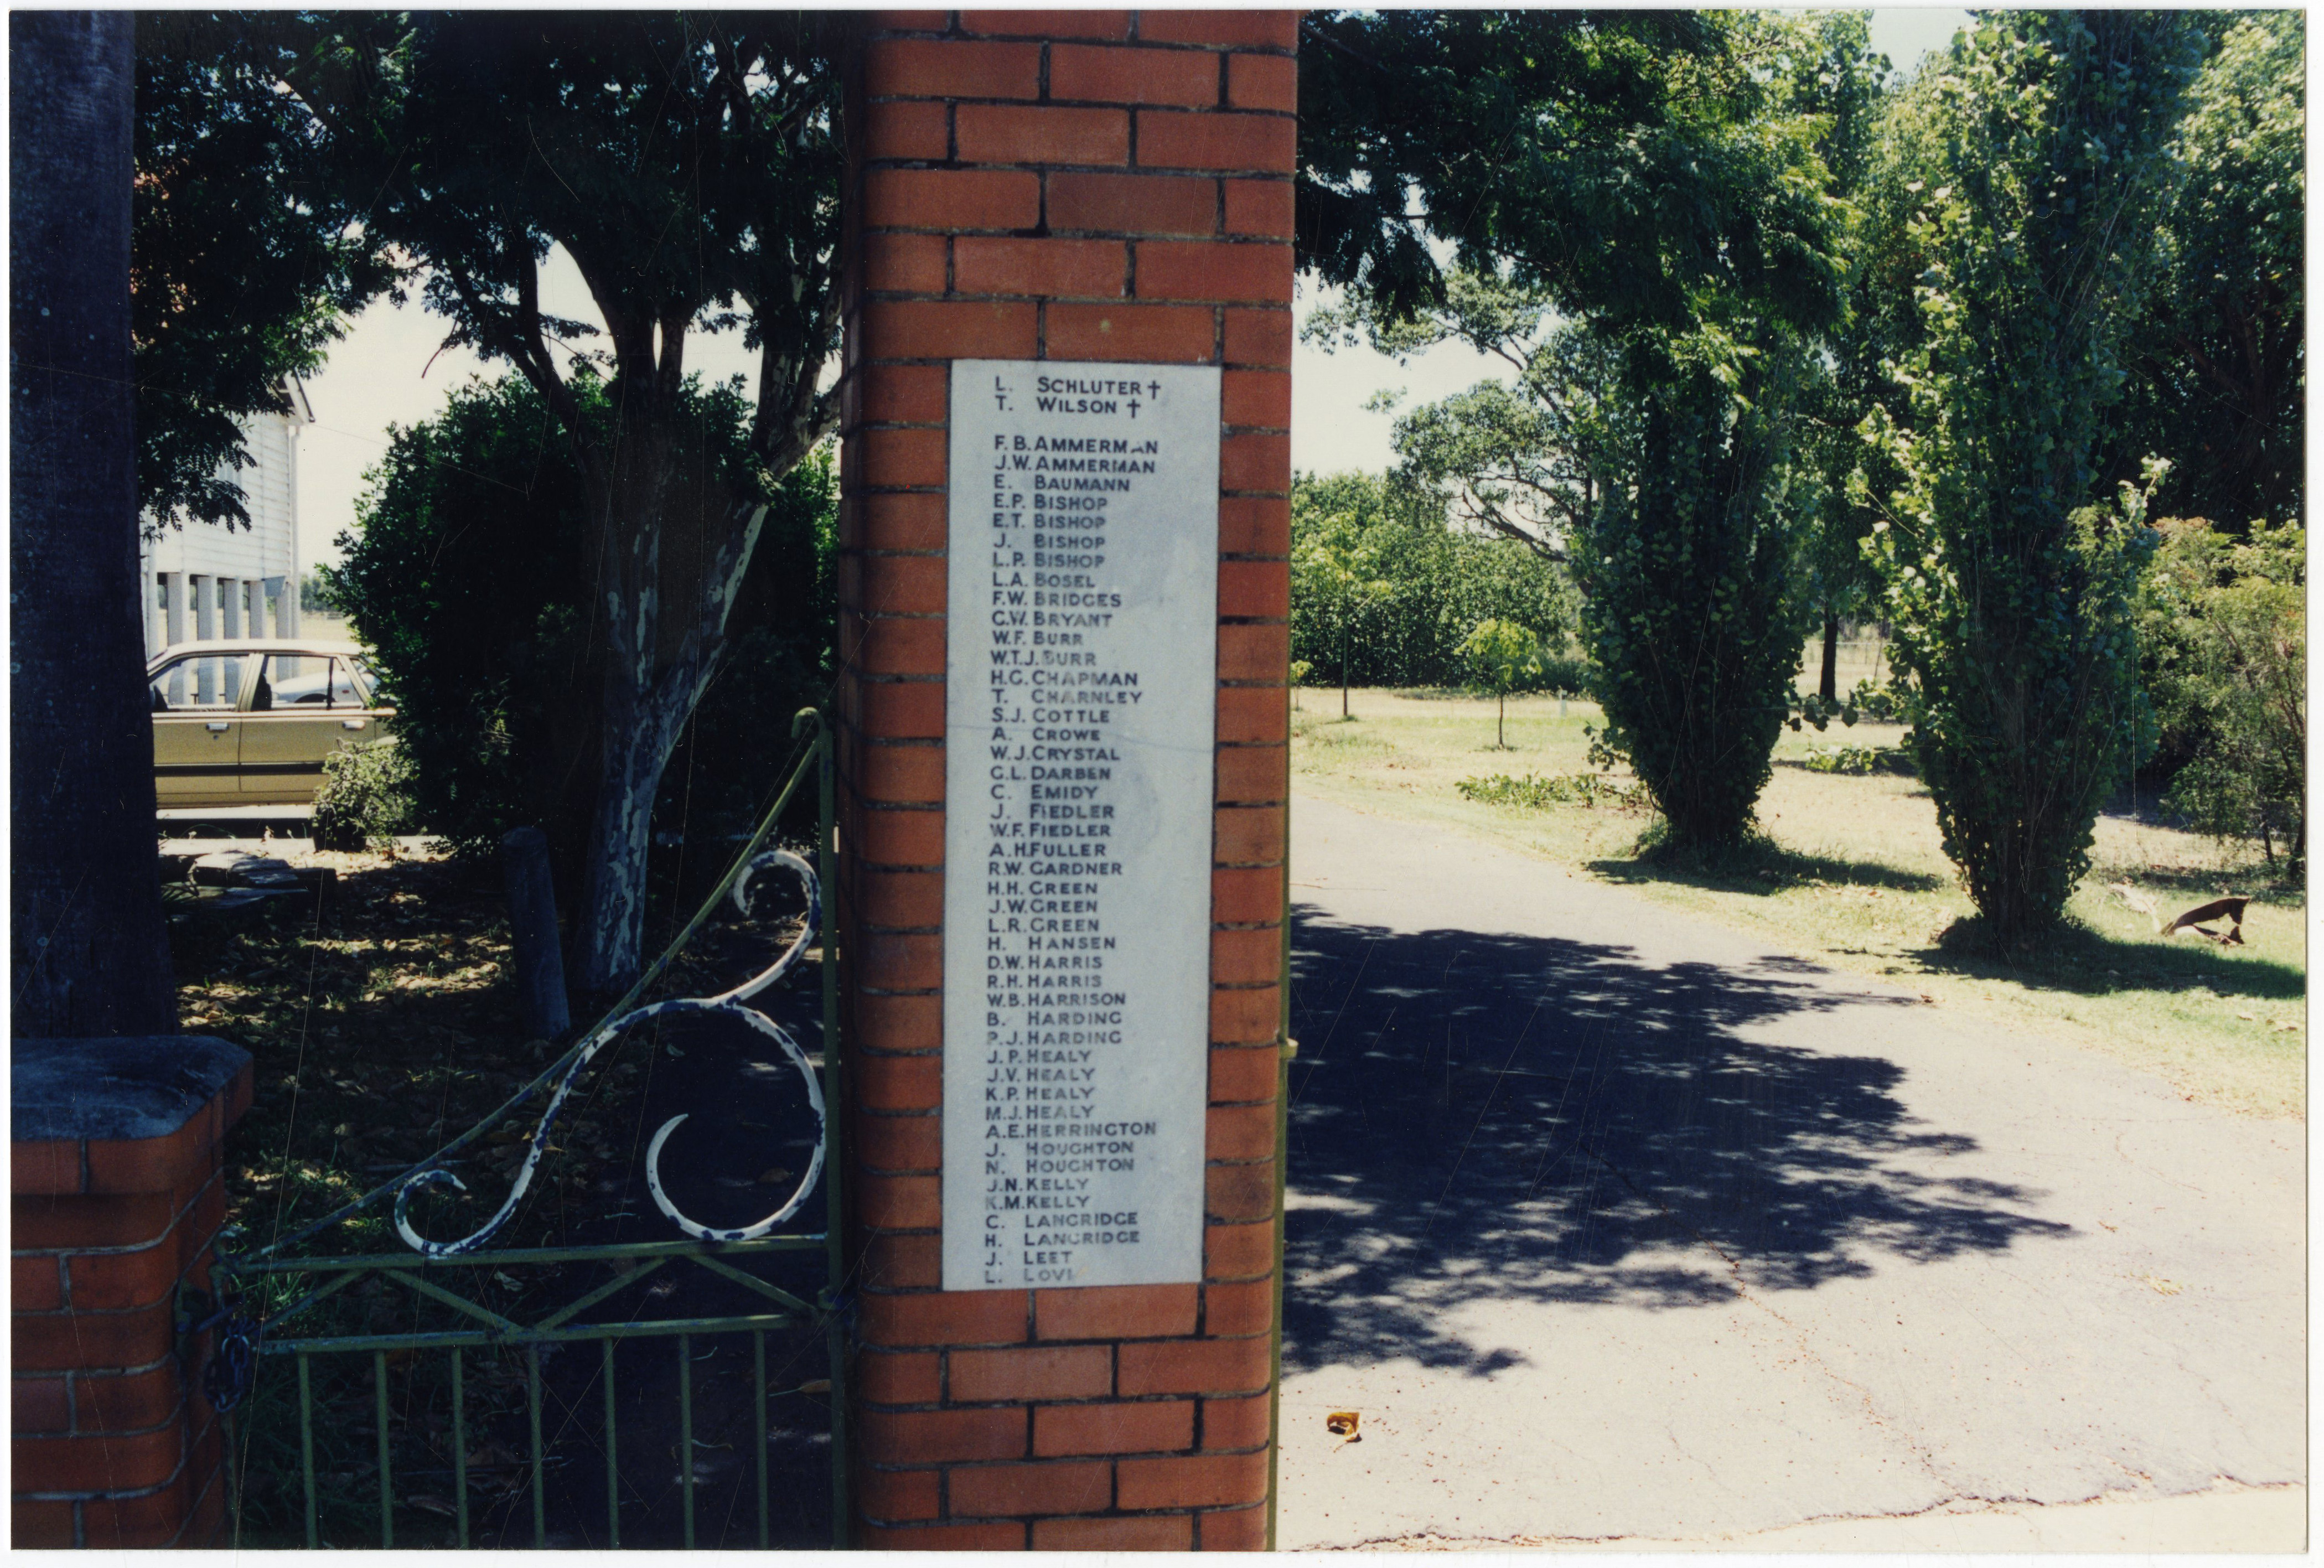 This is an image of the local heritage place known as Pinkenba State School. This image shows detail of the plaque on the left side of the memorial gates.